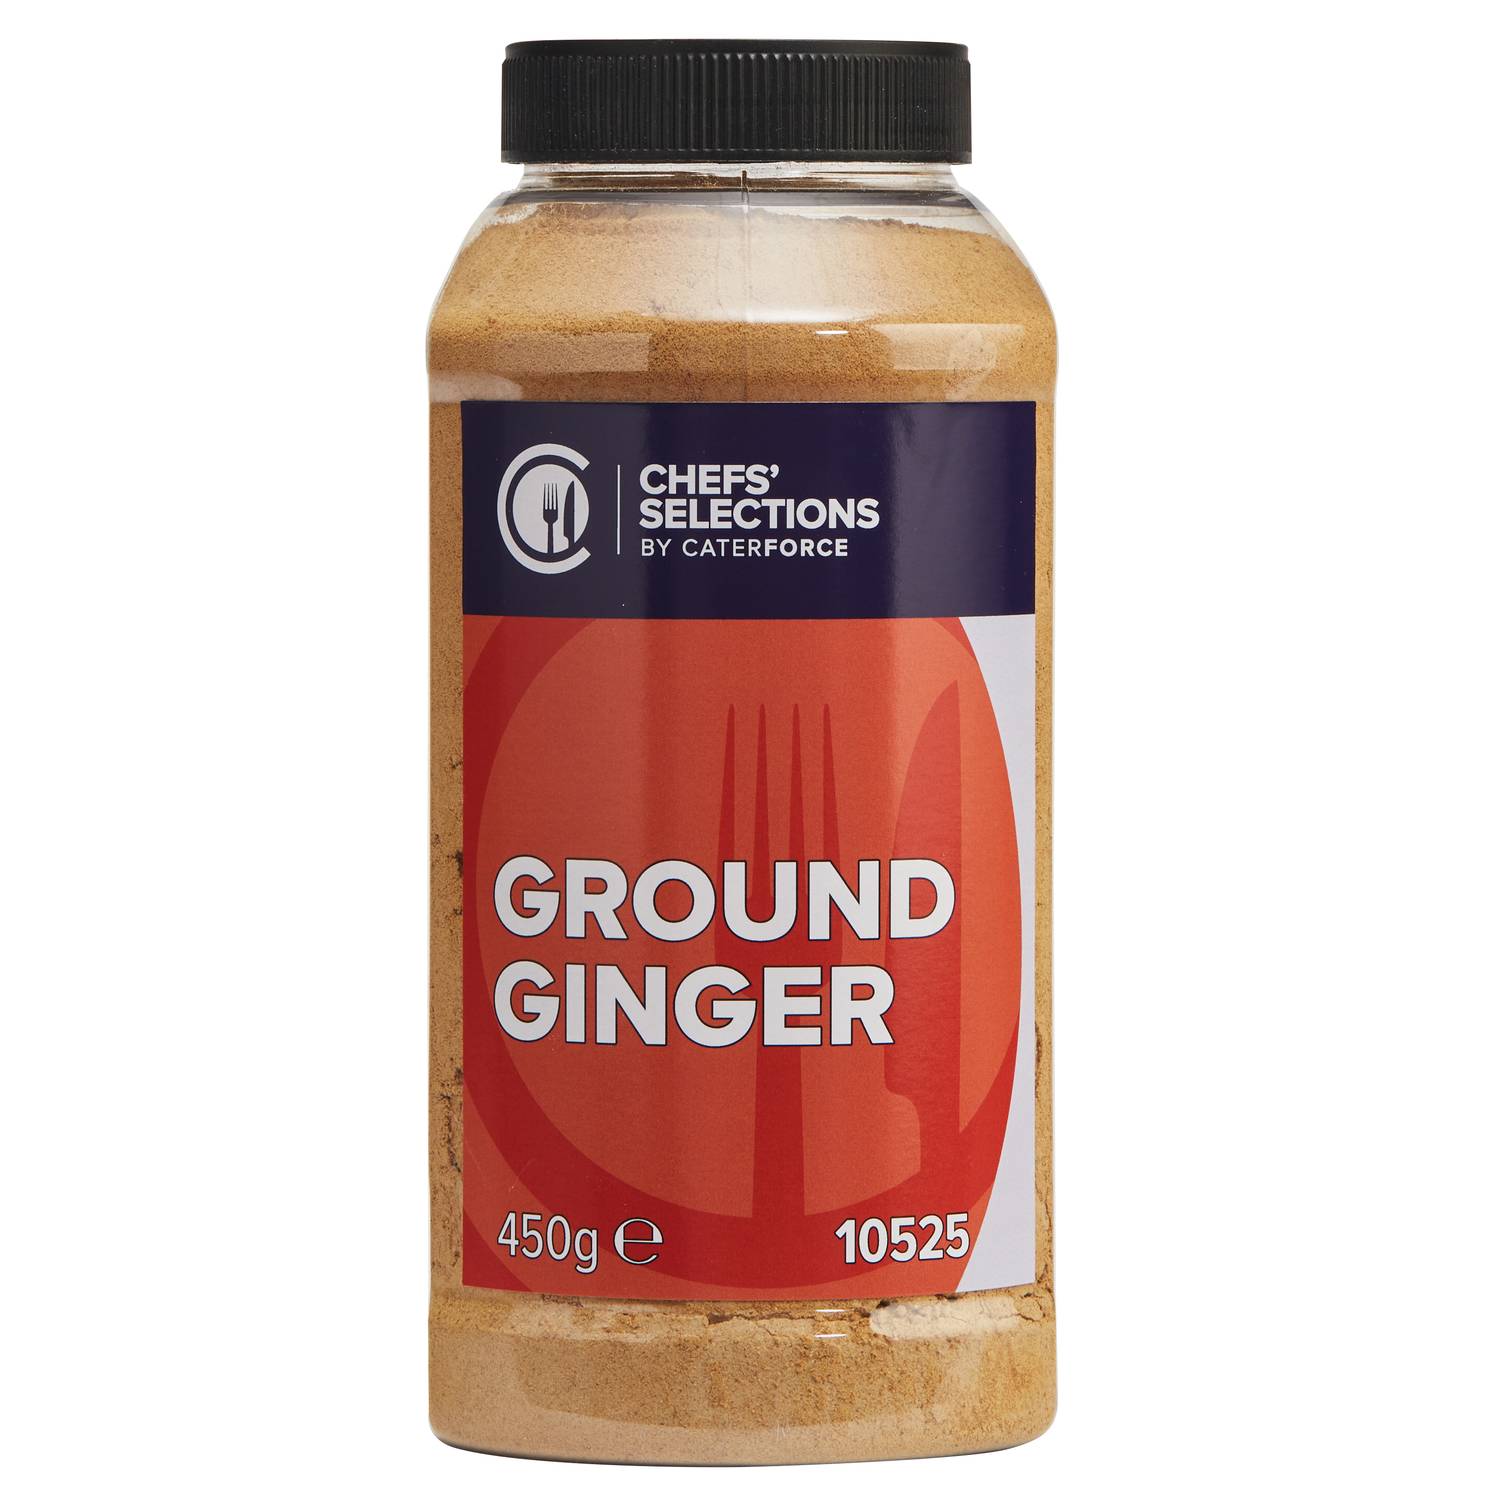 Chefs’ Selections Ground Ginger (6 x 450g)